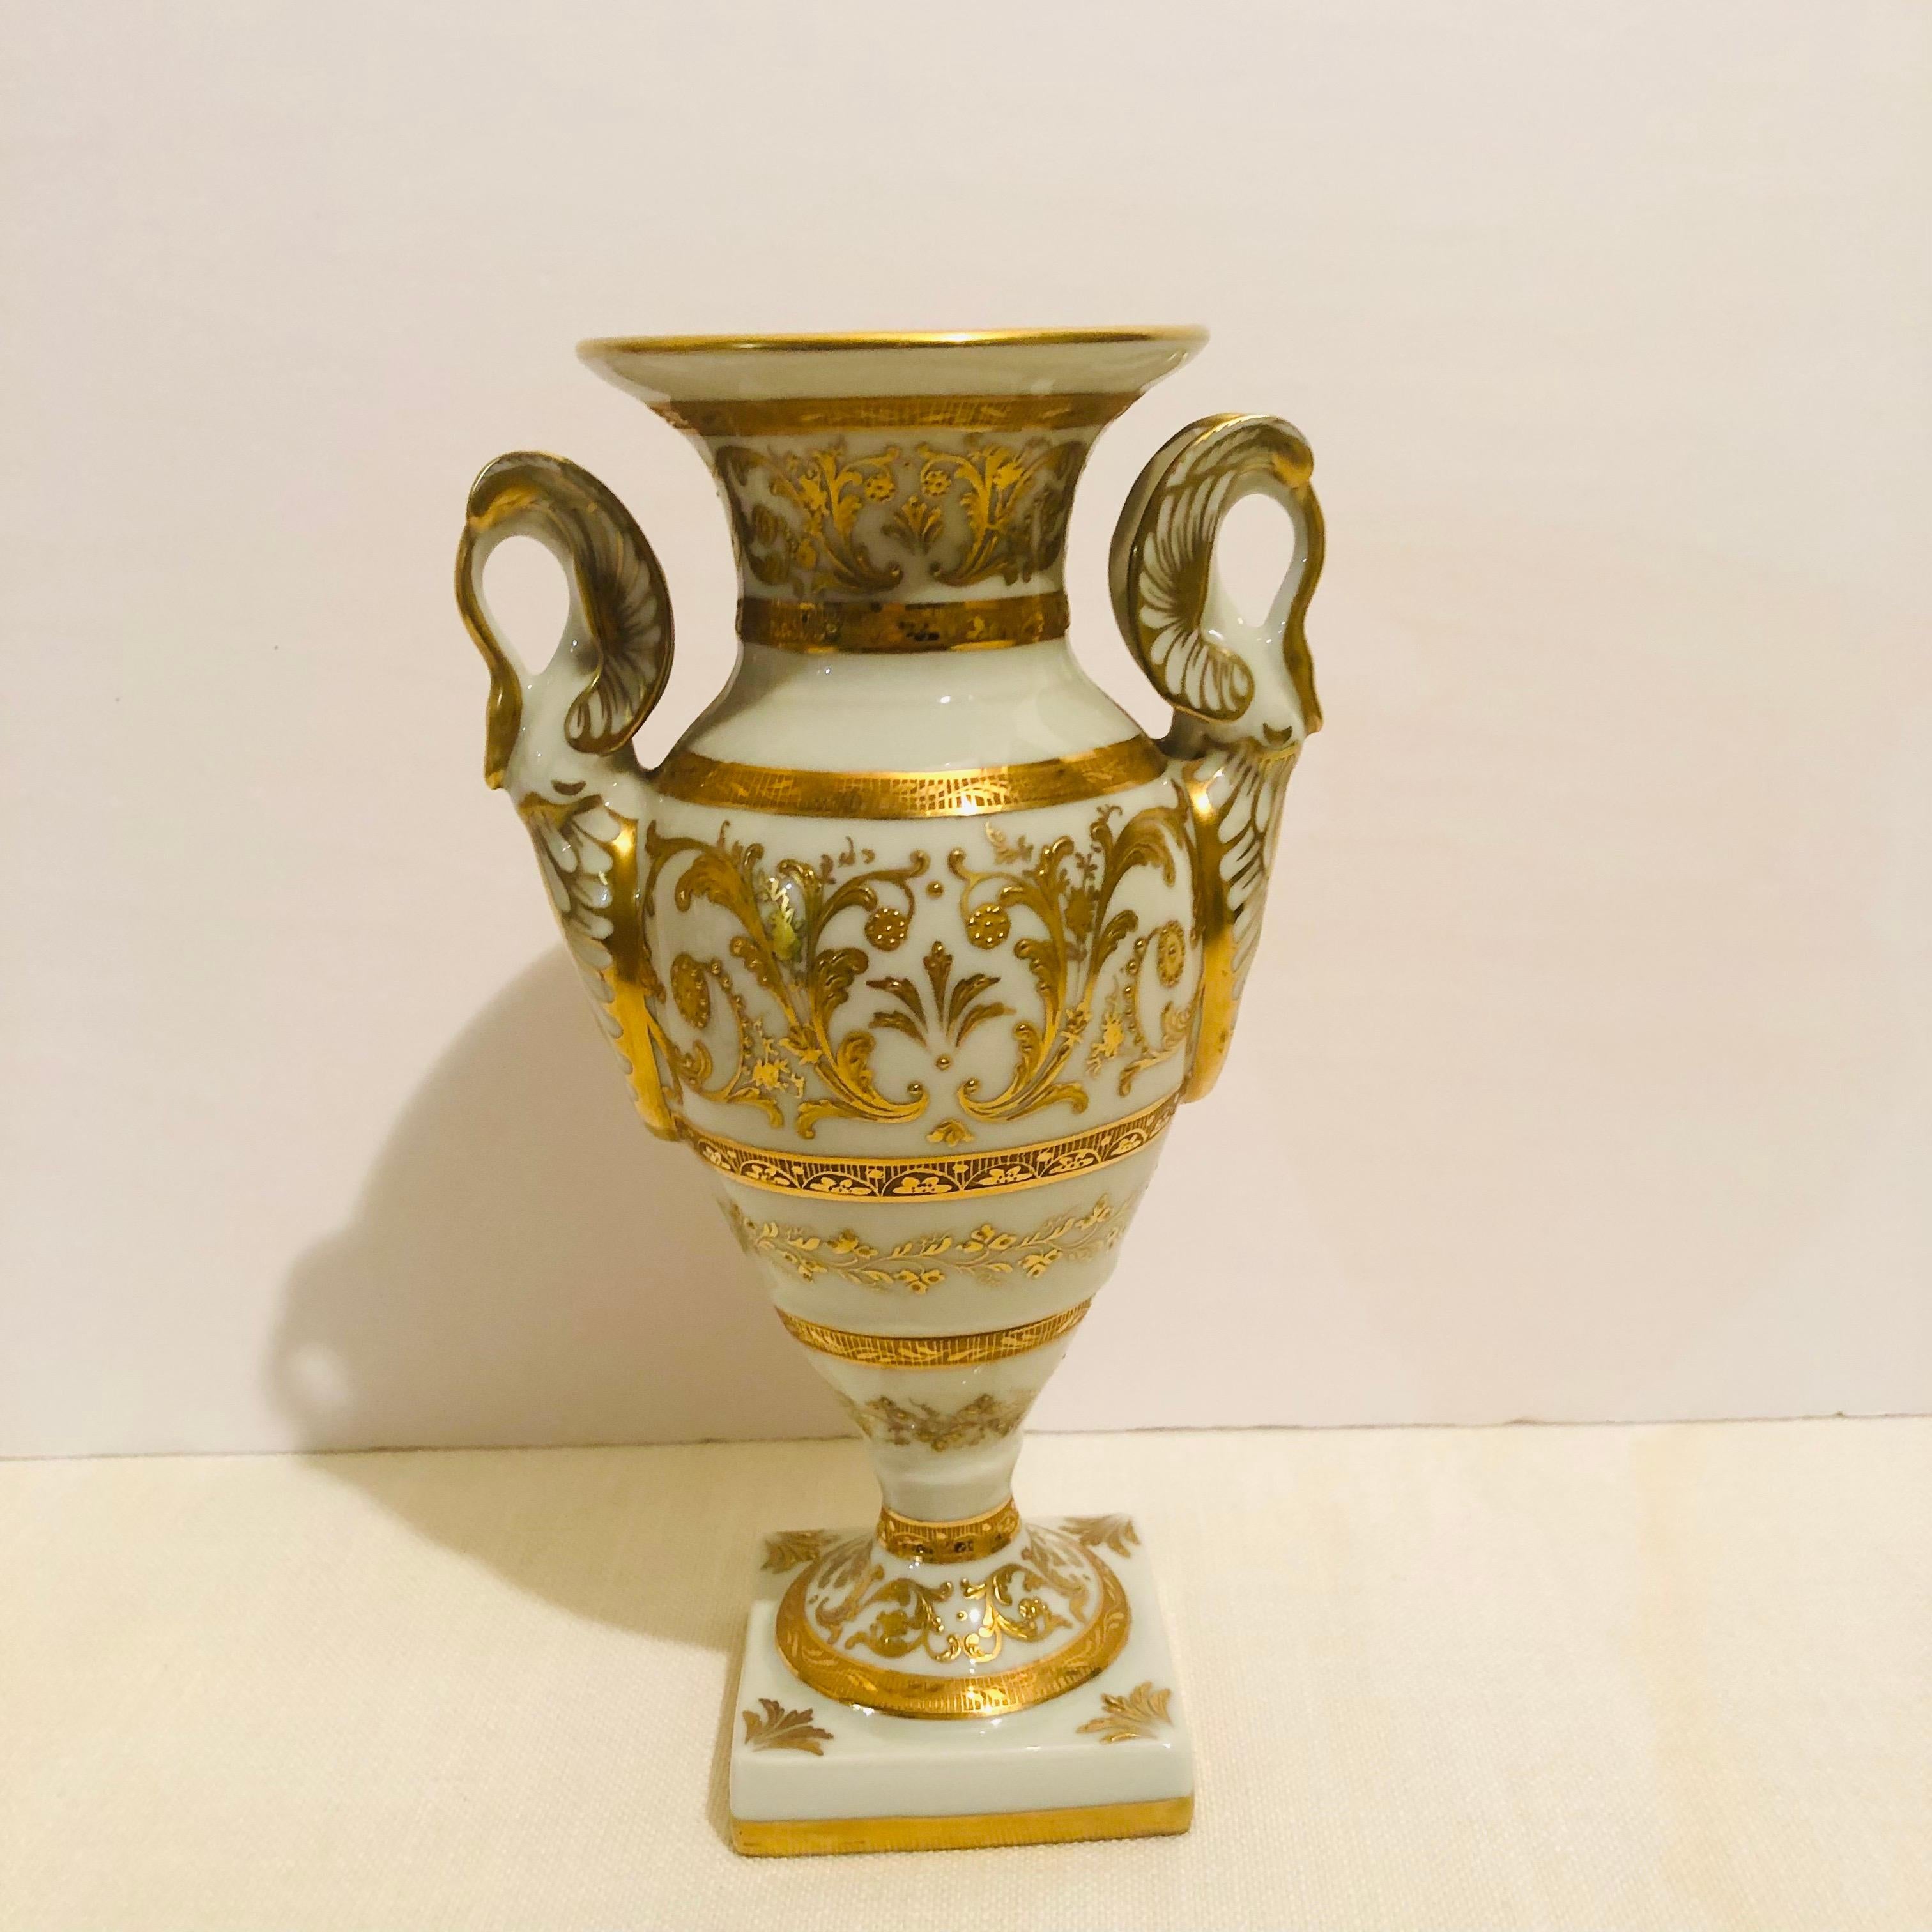   This is an exquisite Le Tallec vase with elaborate raised gilding on a white ground. The vase has neoclassical type handles that look like swan heads. It would be a gorgeous accent piece for your mantle, on a table or for your dining room table.